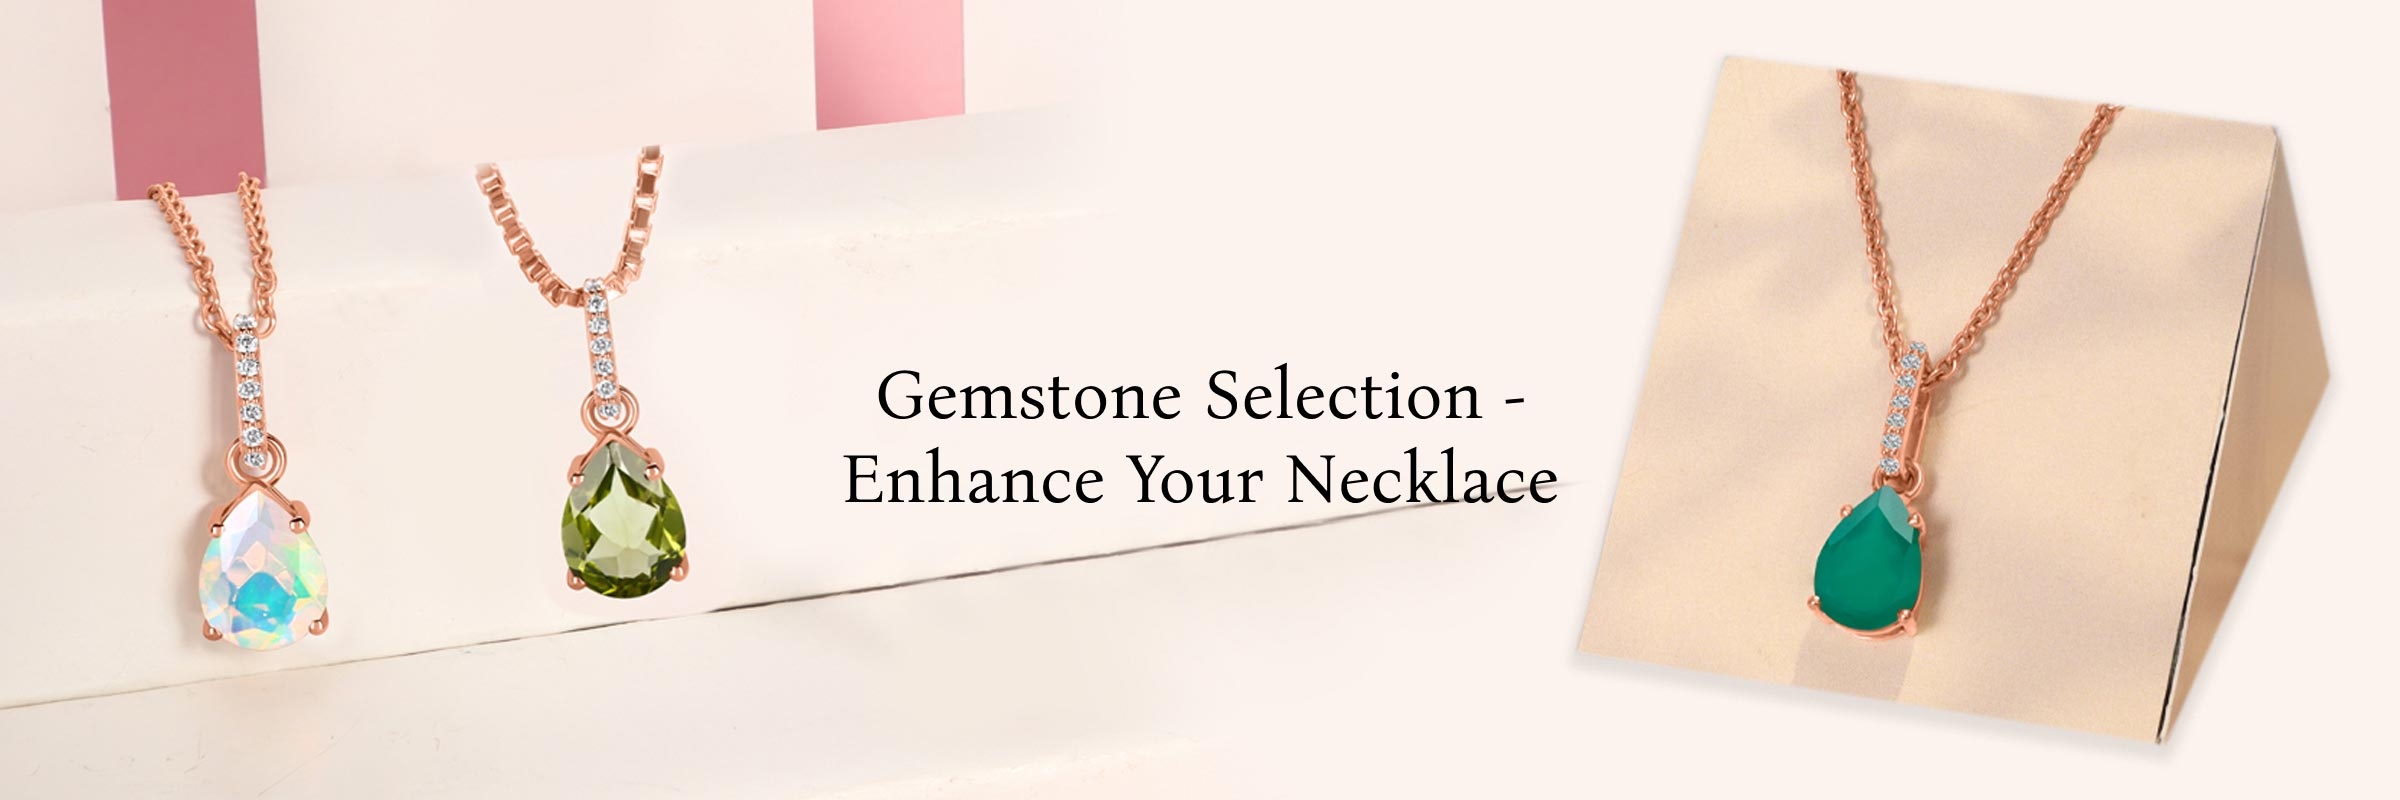 Some best Gemstones for your Necklace